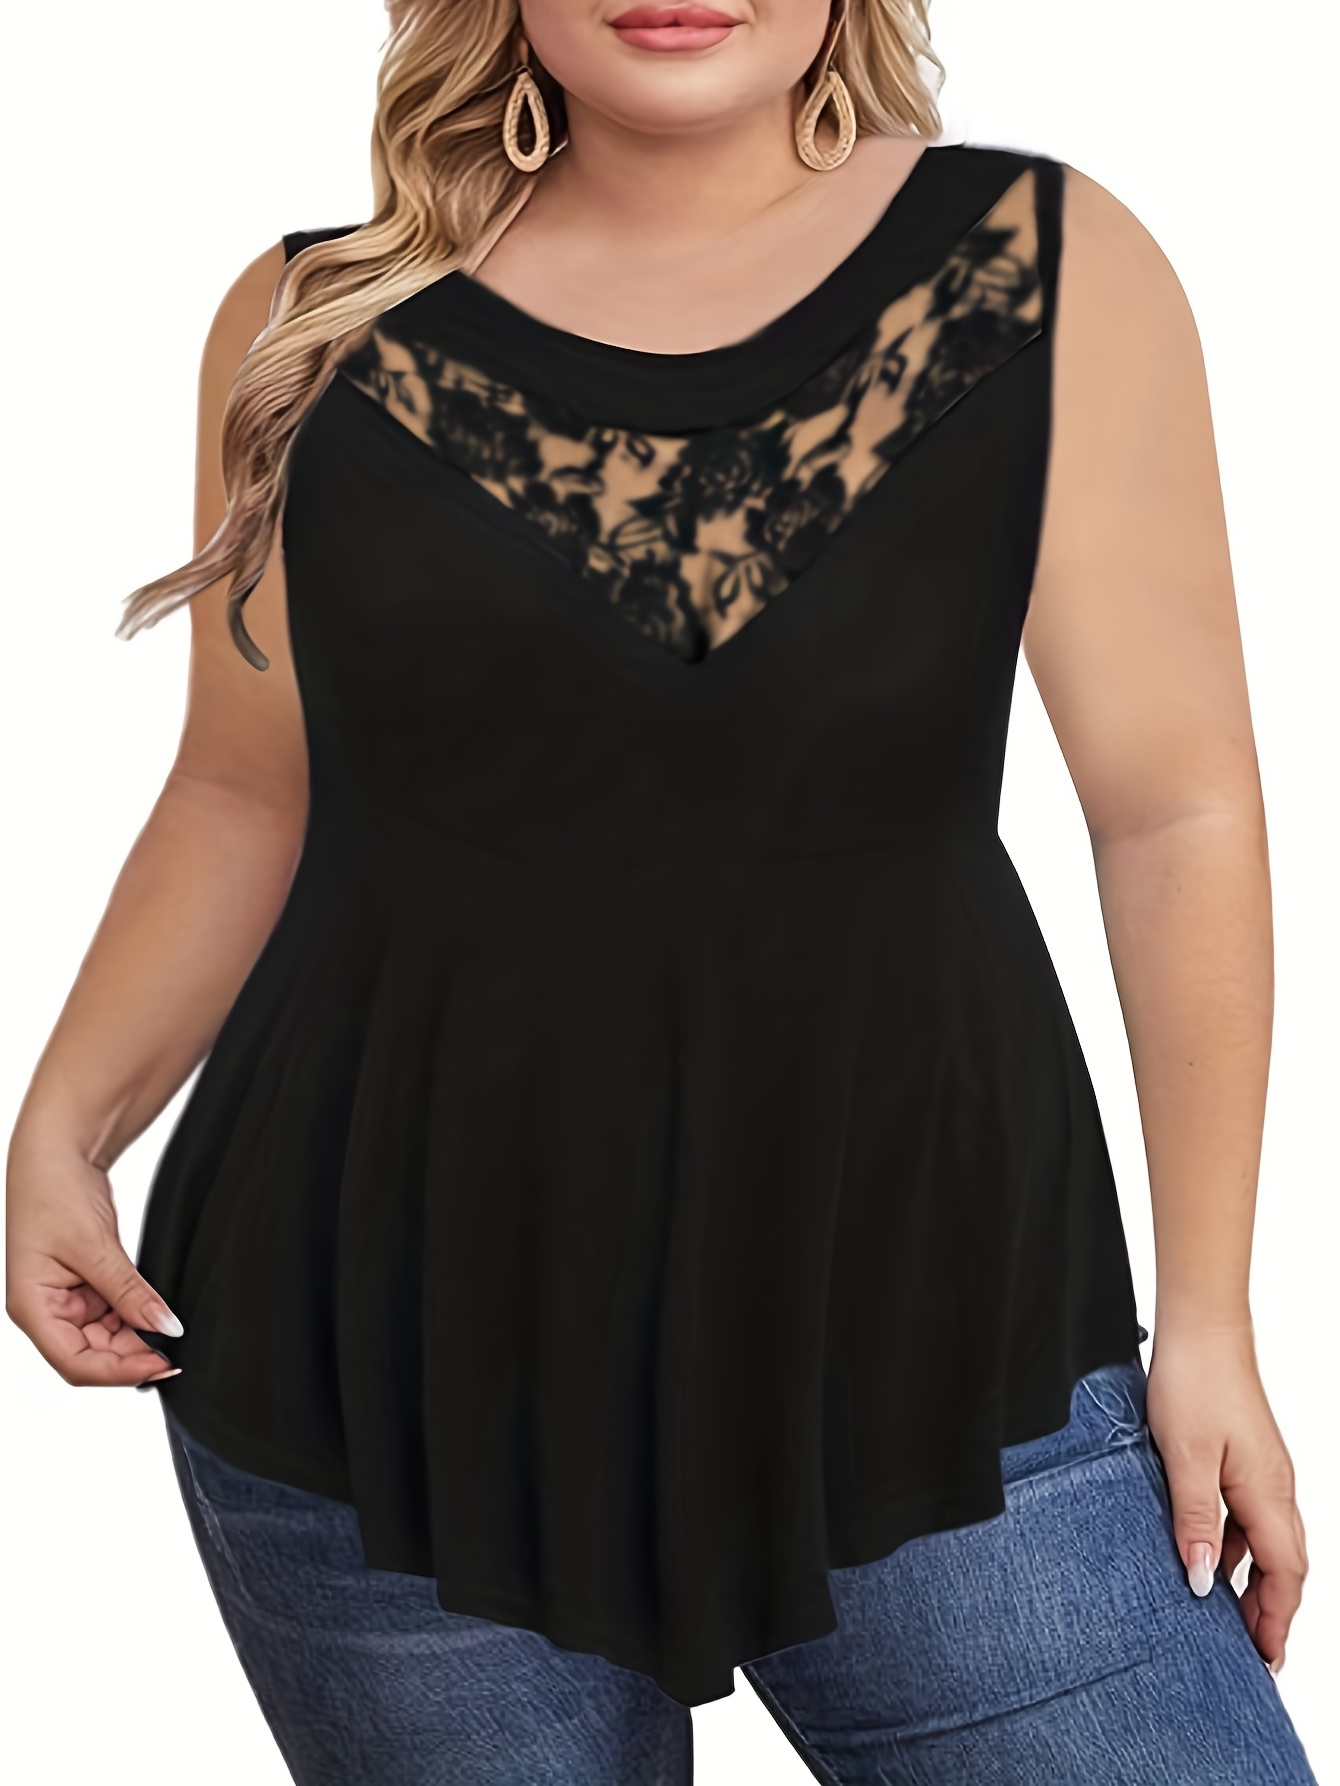 Kurve Plus Size The Excellent Camisole (1XL-3XL) -Made in USA